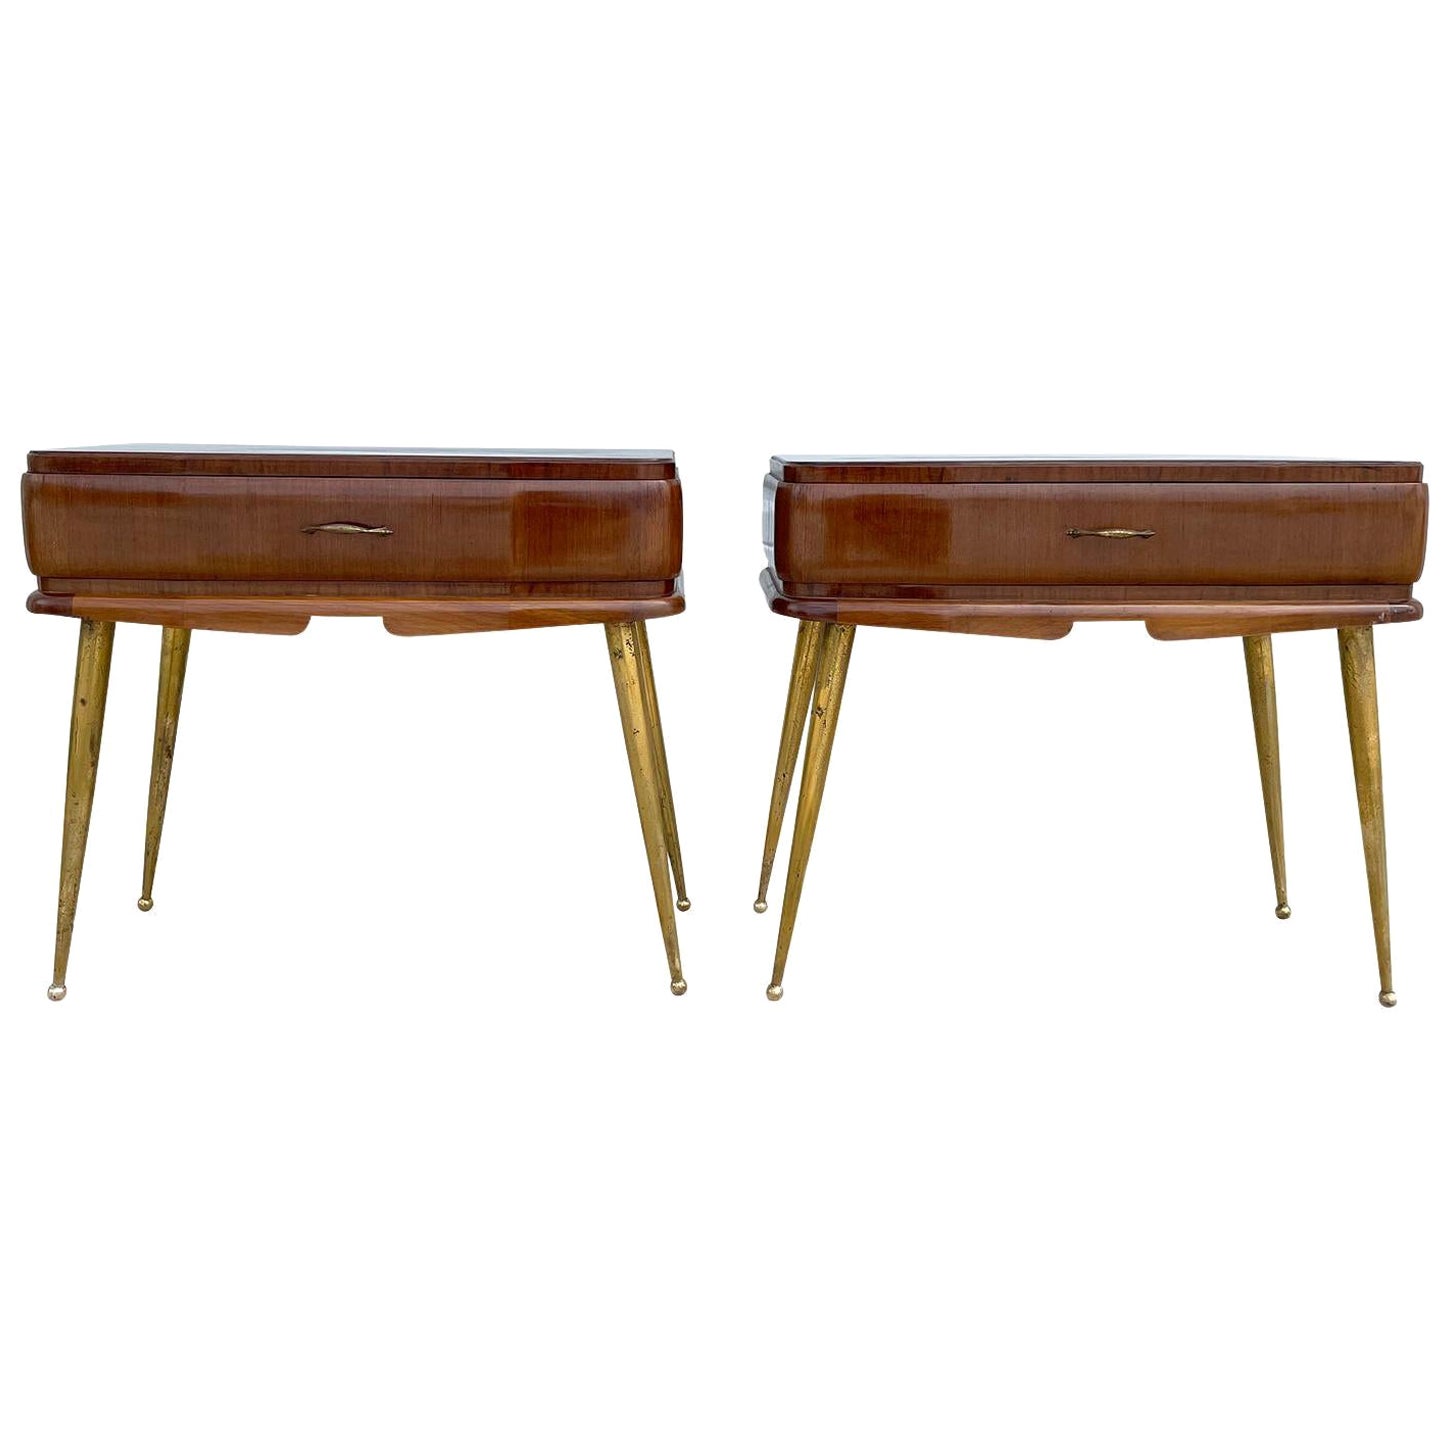 20th Century Brown Italian Pair of Mahogany Nightstands, Brass Bedside Tables